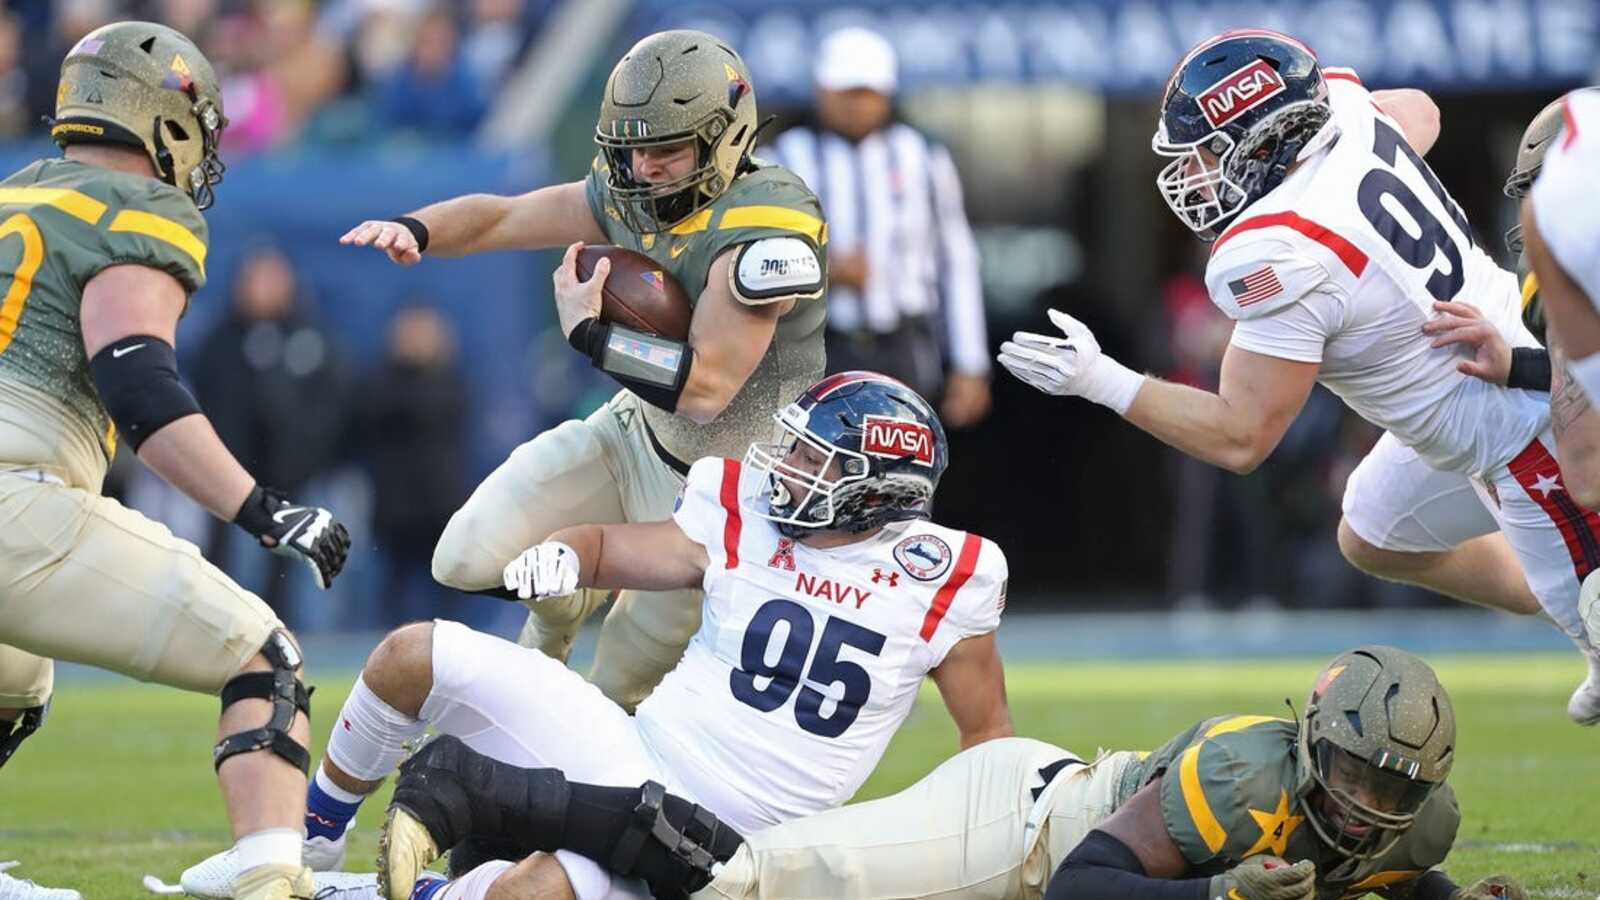 In 123rd meeting, Army edges Navy on field goal in second OT